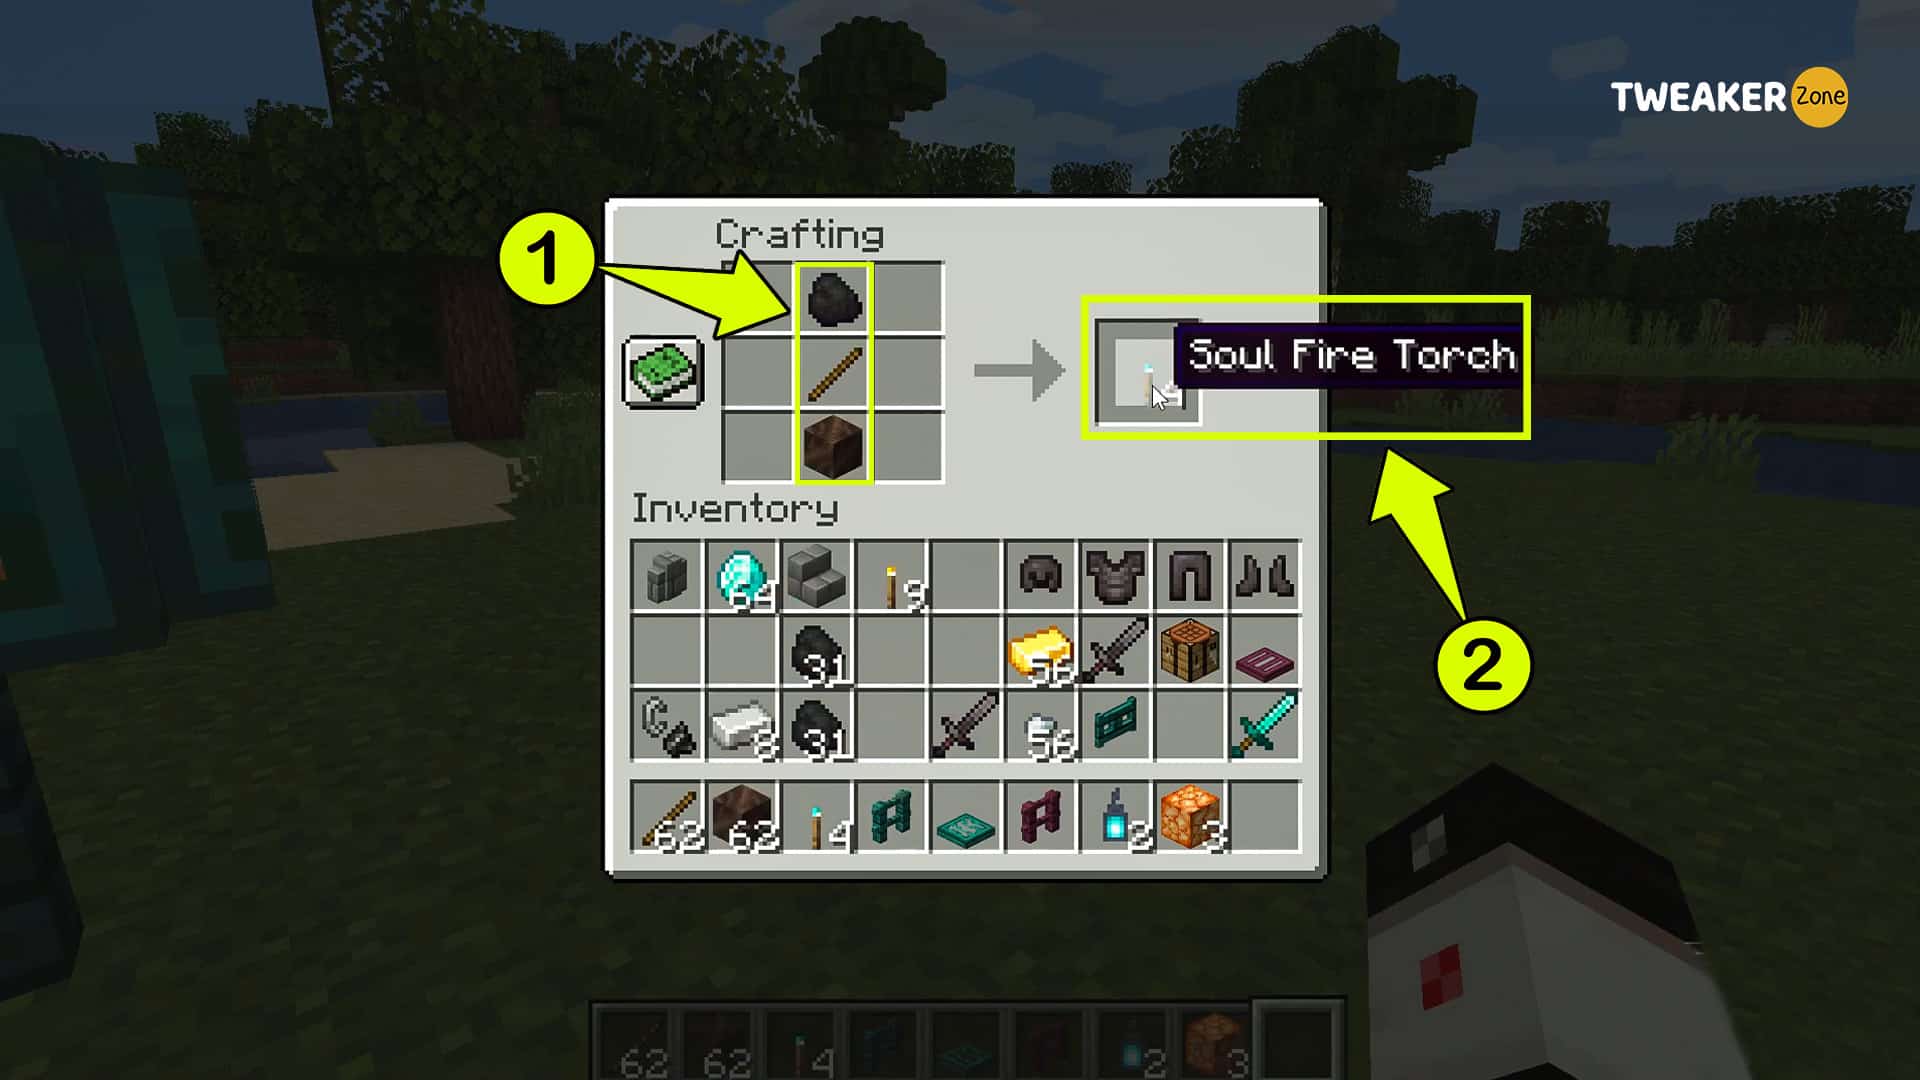 How To Make Blue Torch In Minecraft